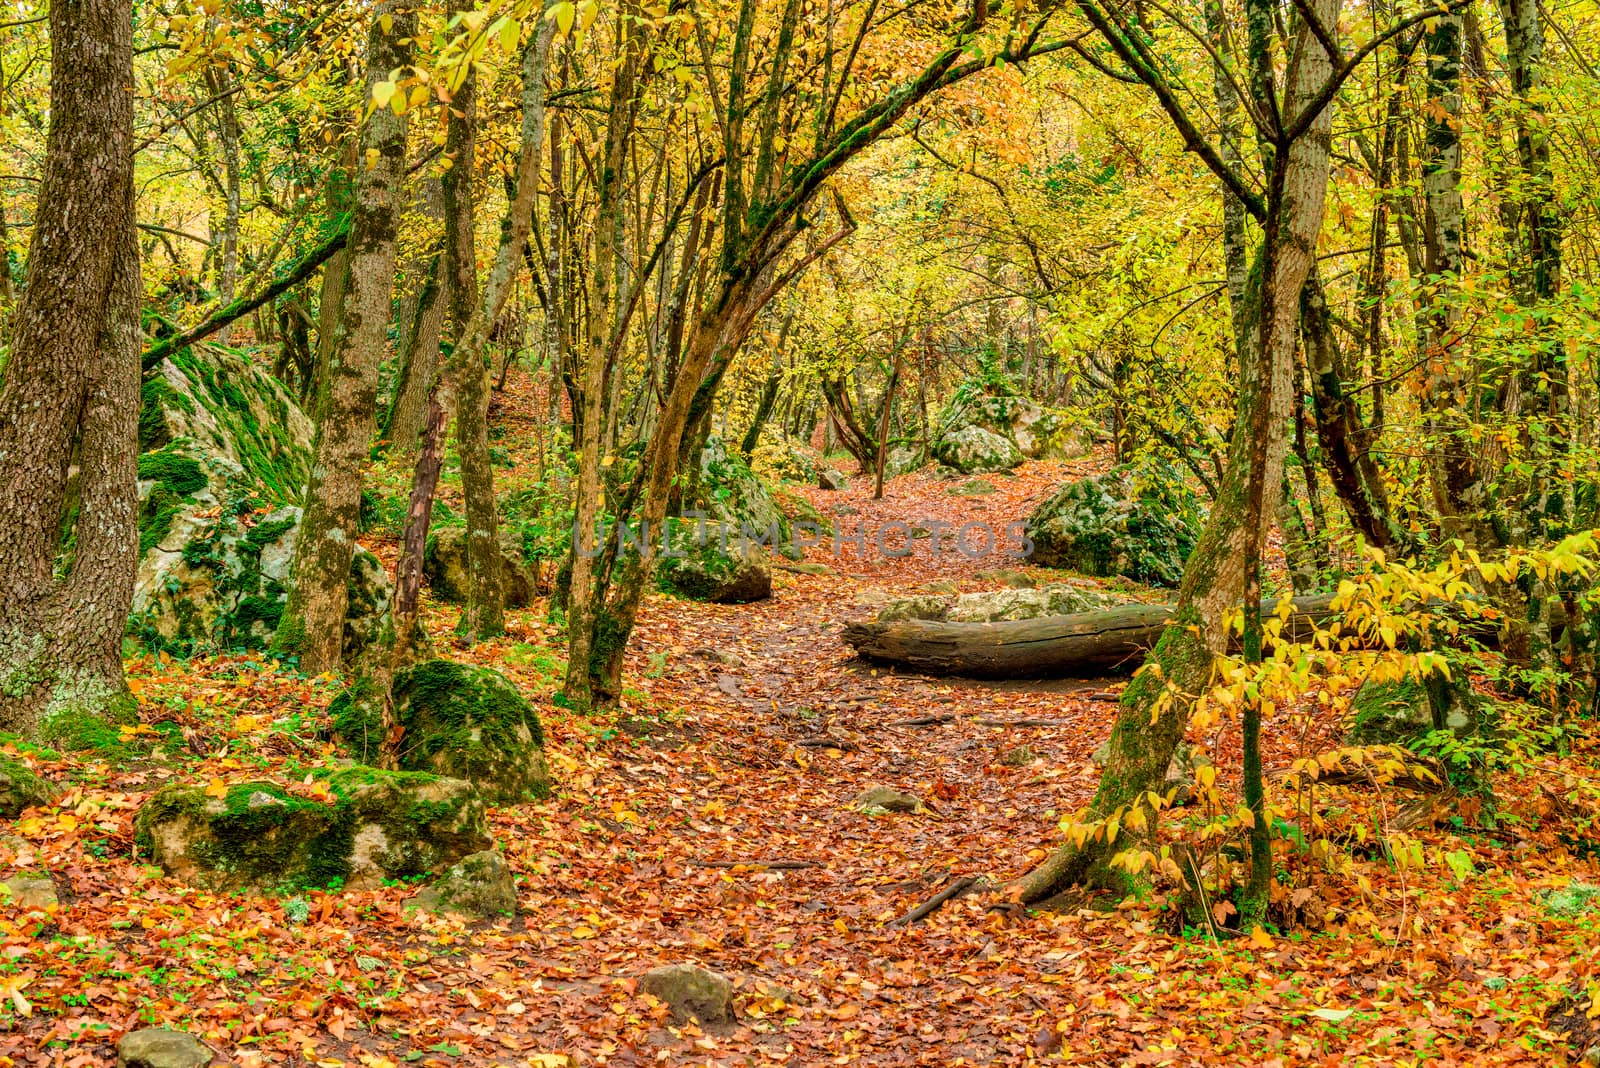 The path in the autumn forest, covered with fallen bright leaves